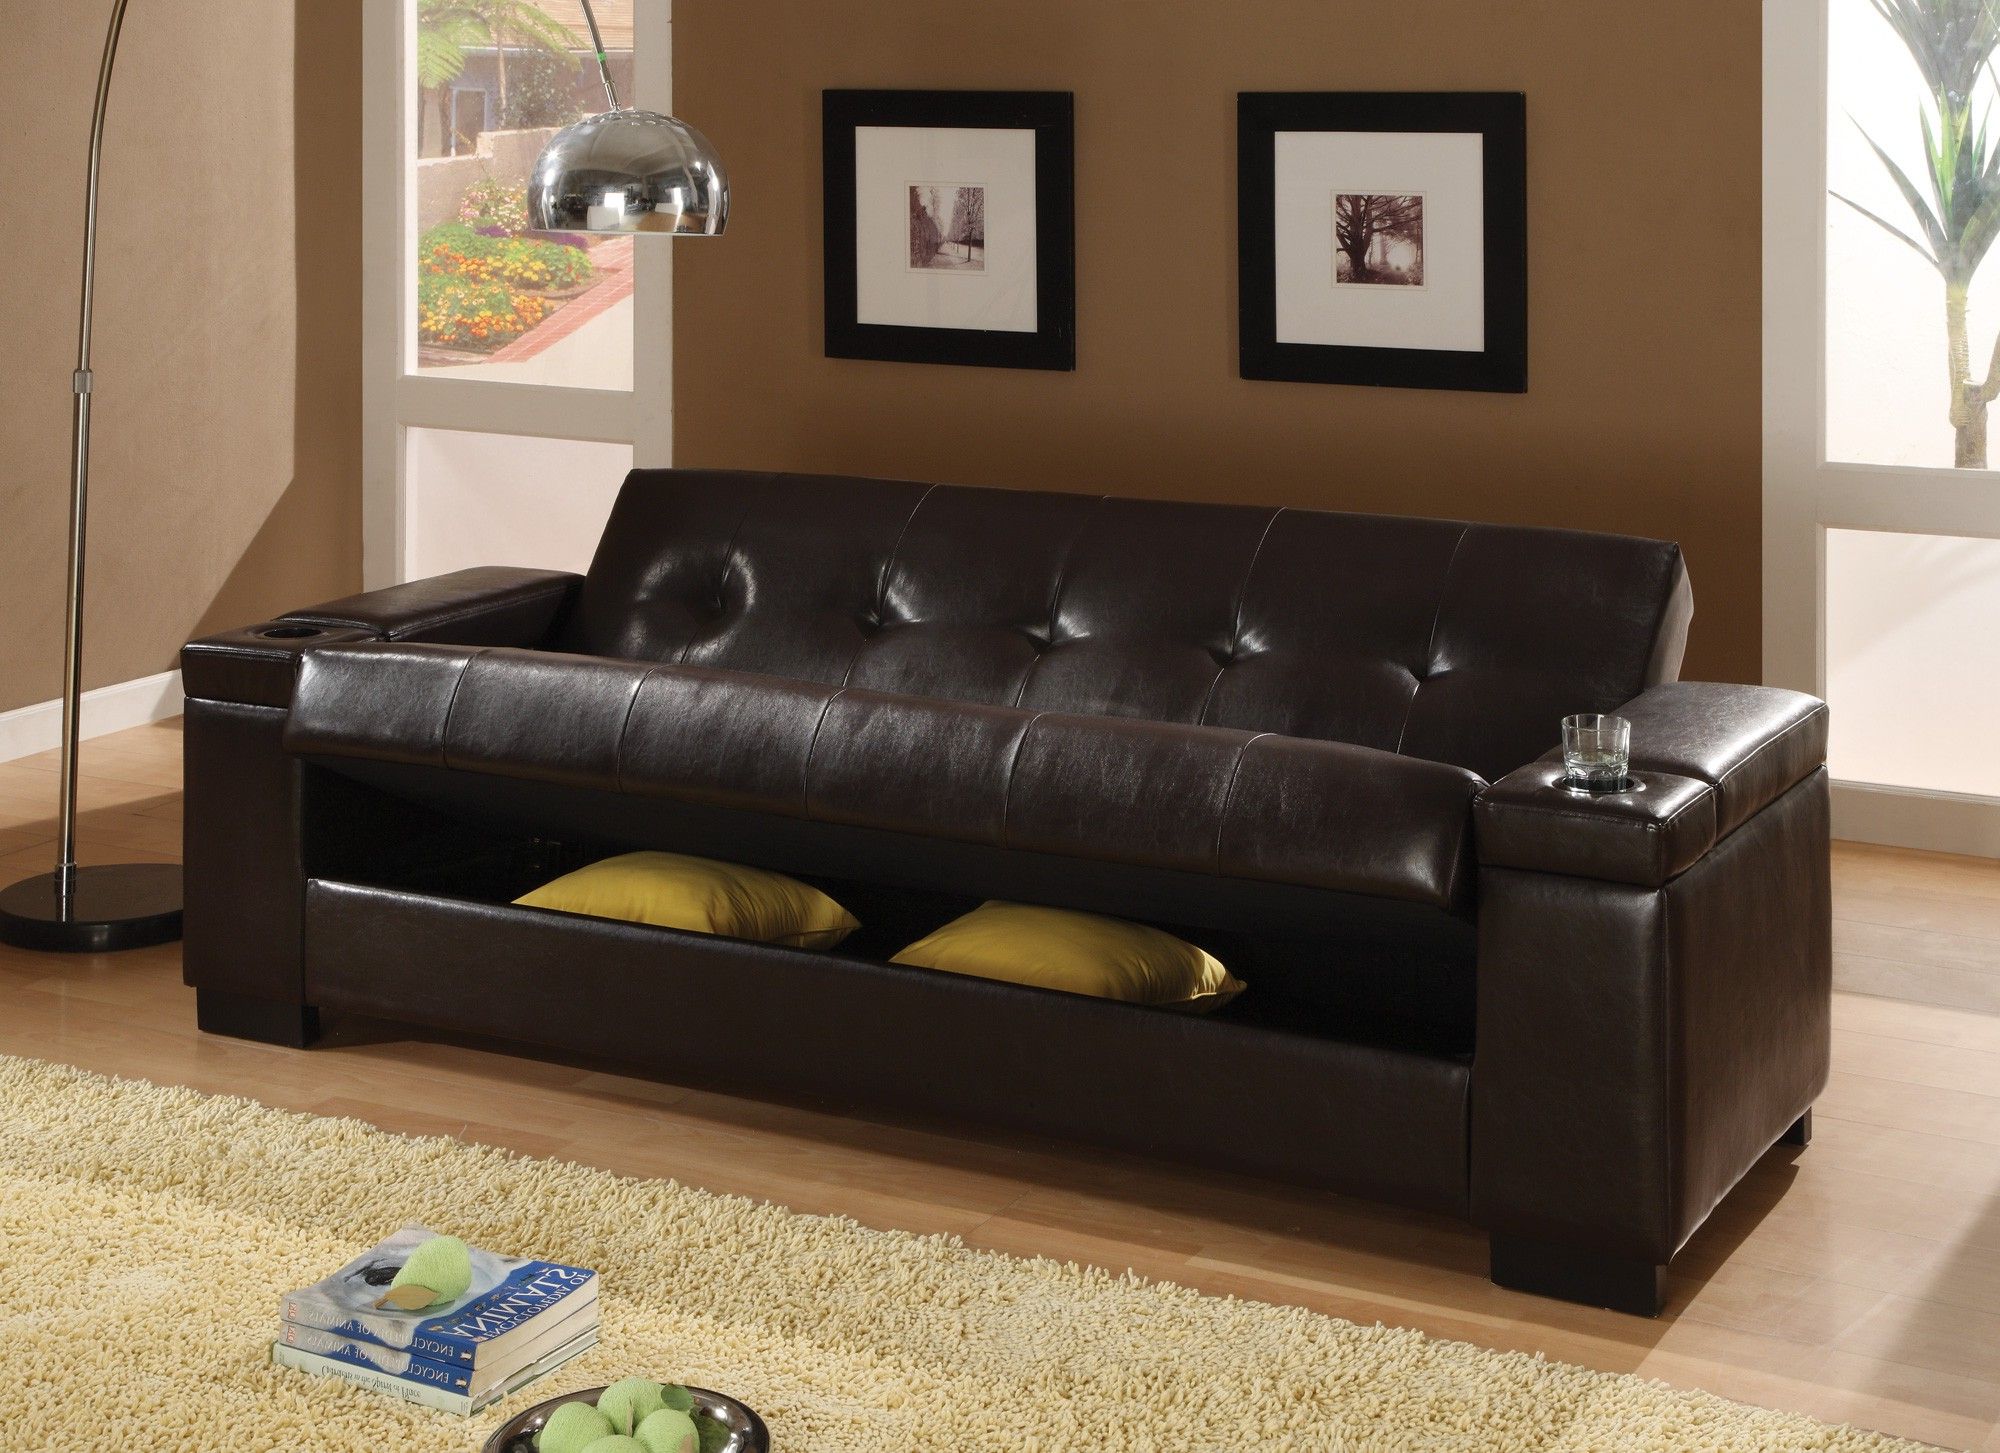 Preferred Faux Leather Convertible Sofa Sleeper With Storage 300143 From Coaster With 8 Seat Convertible Sofas (Photo 9 of 15)